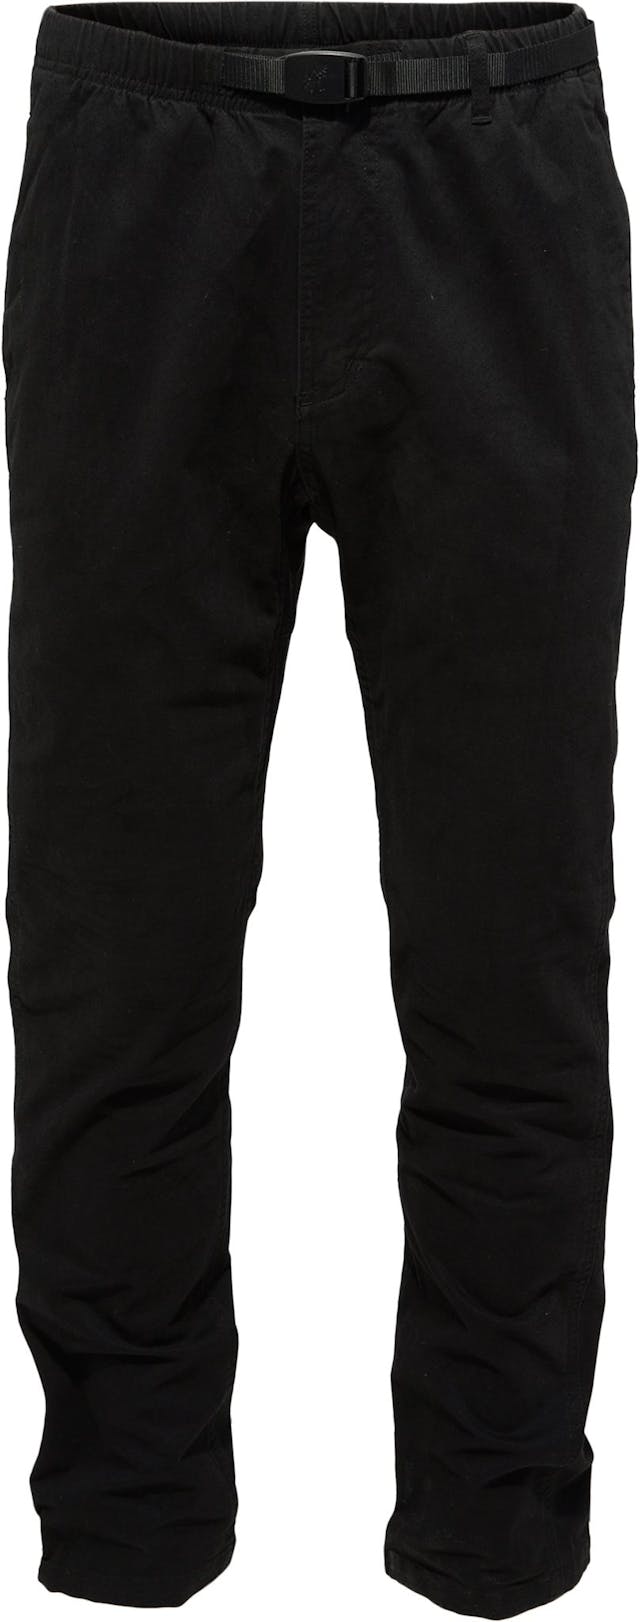 Product image for NN Pants - Men's